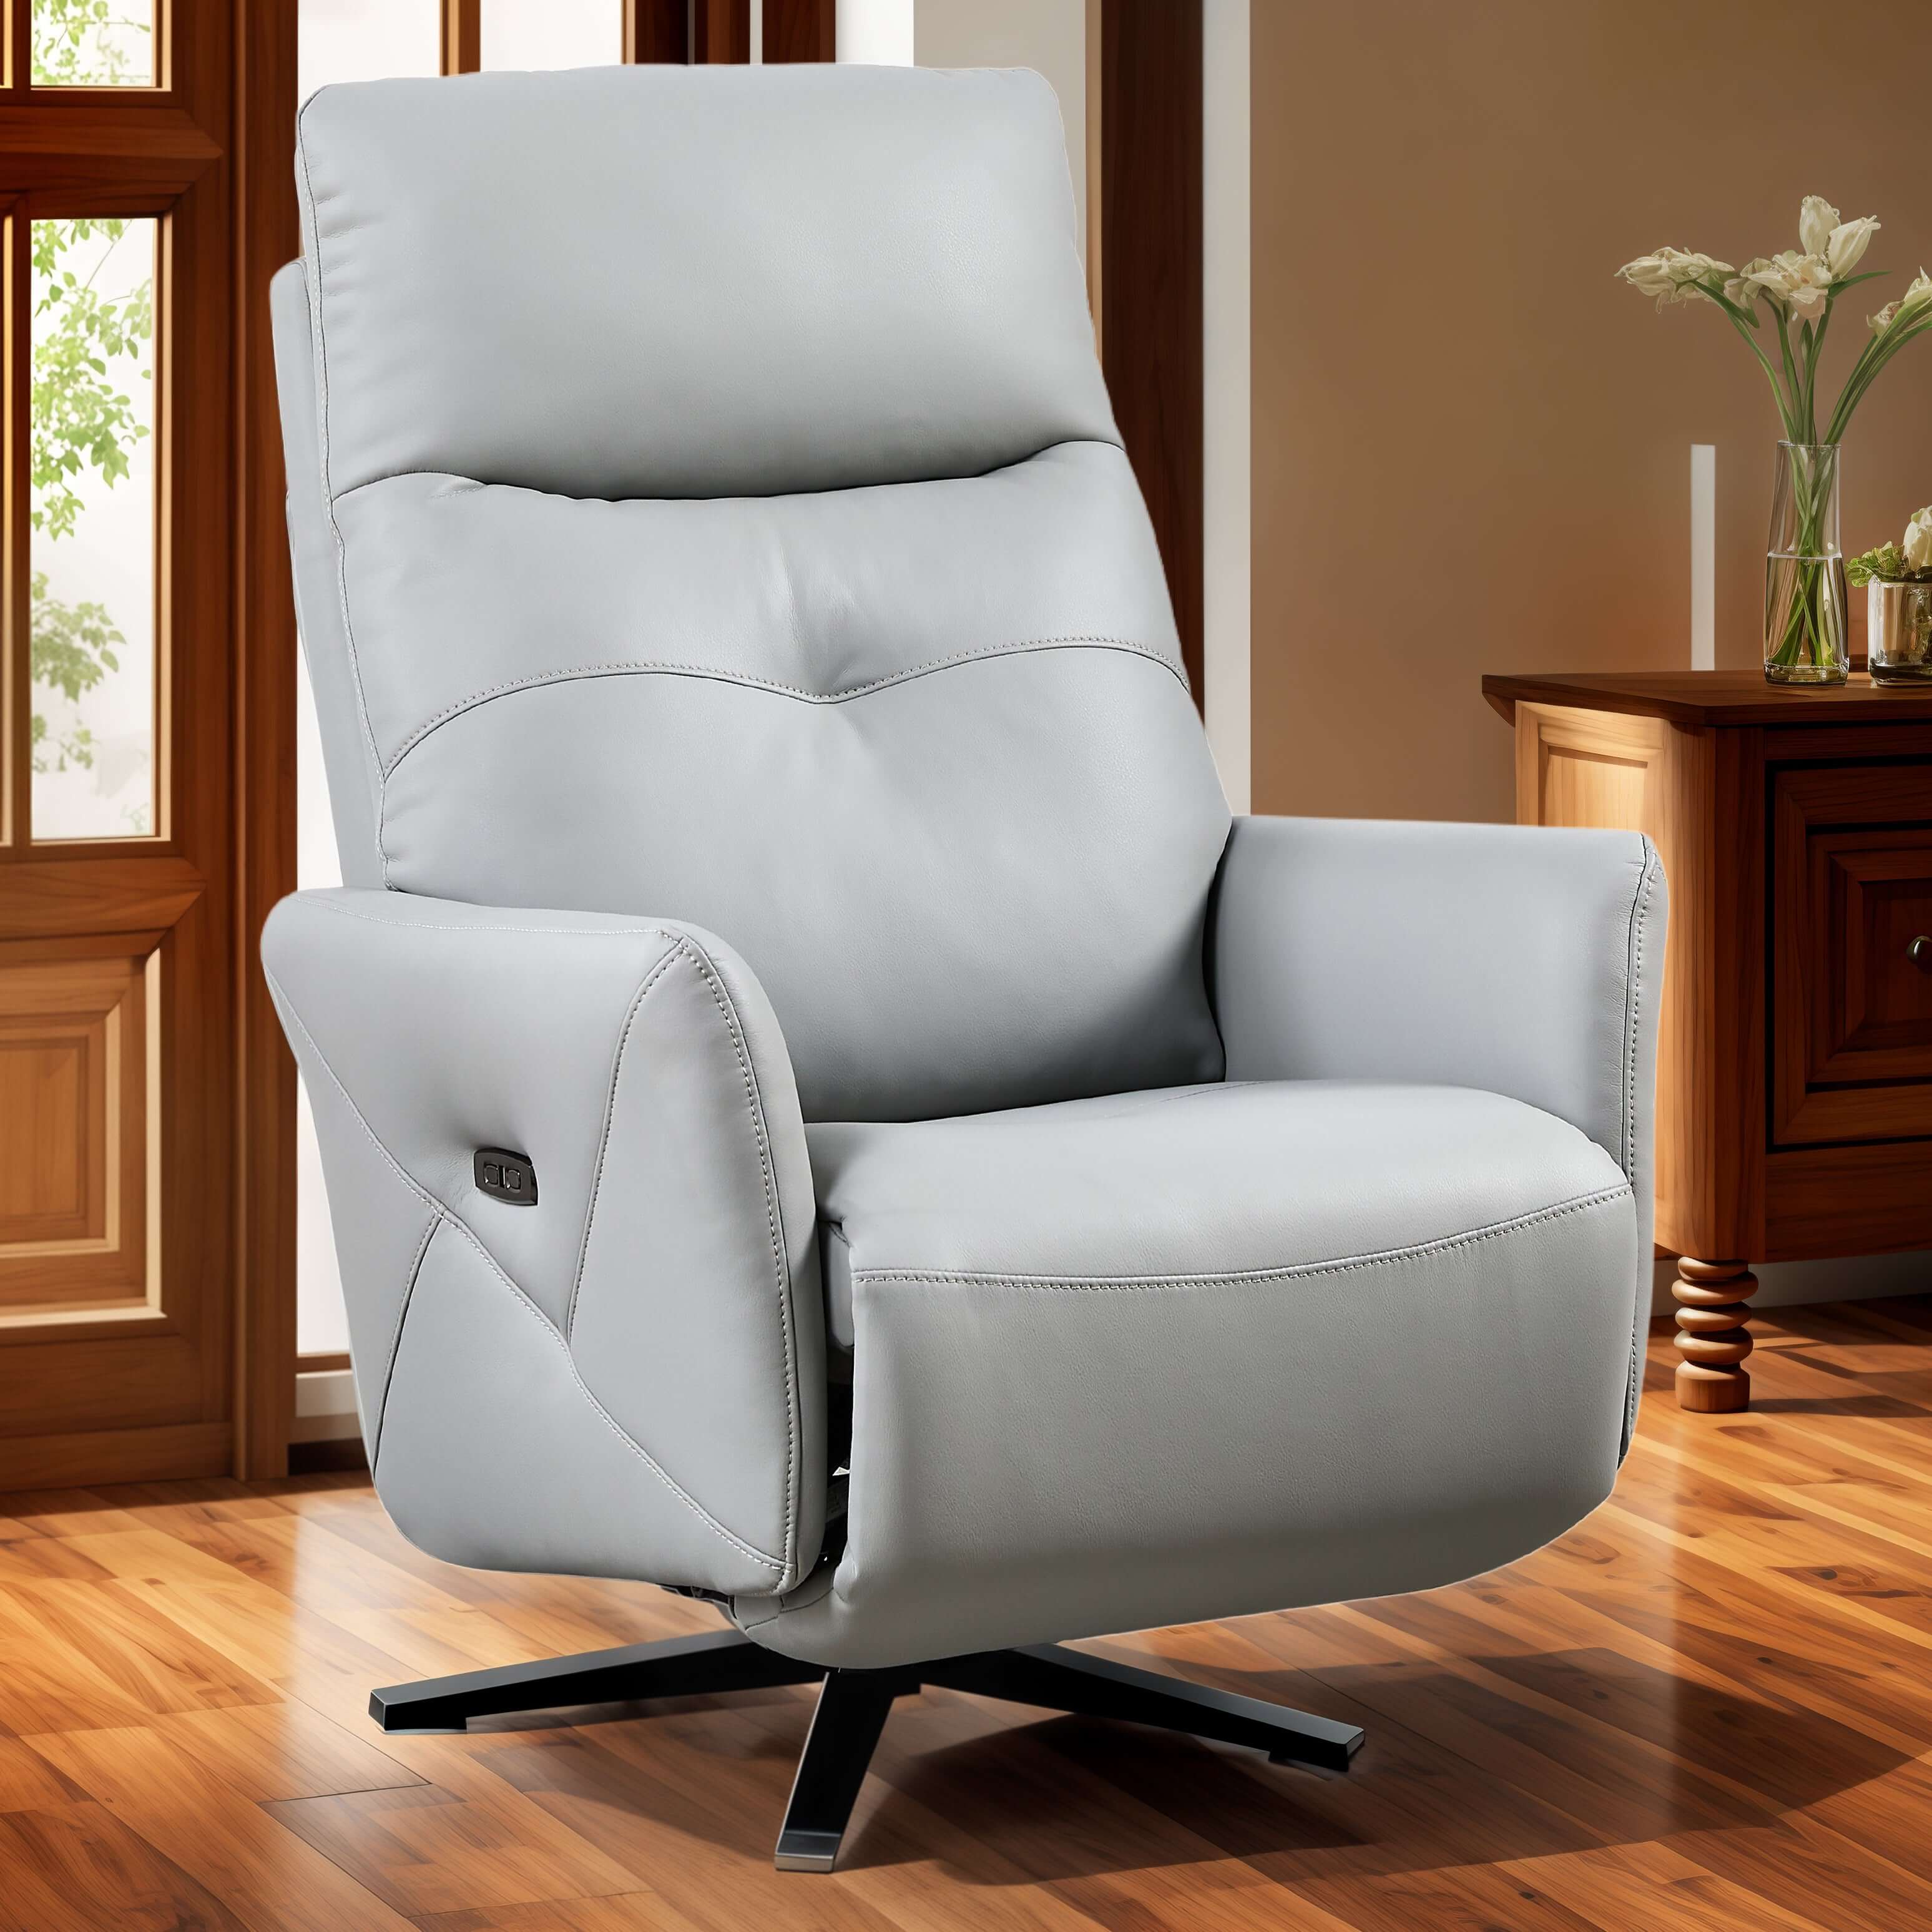 PUG258Y Power Zero Gravity Recliner Chair with Adjustable Headrest,360° Swivel USB Charge Port, Leather - Argent﻿